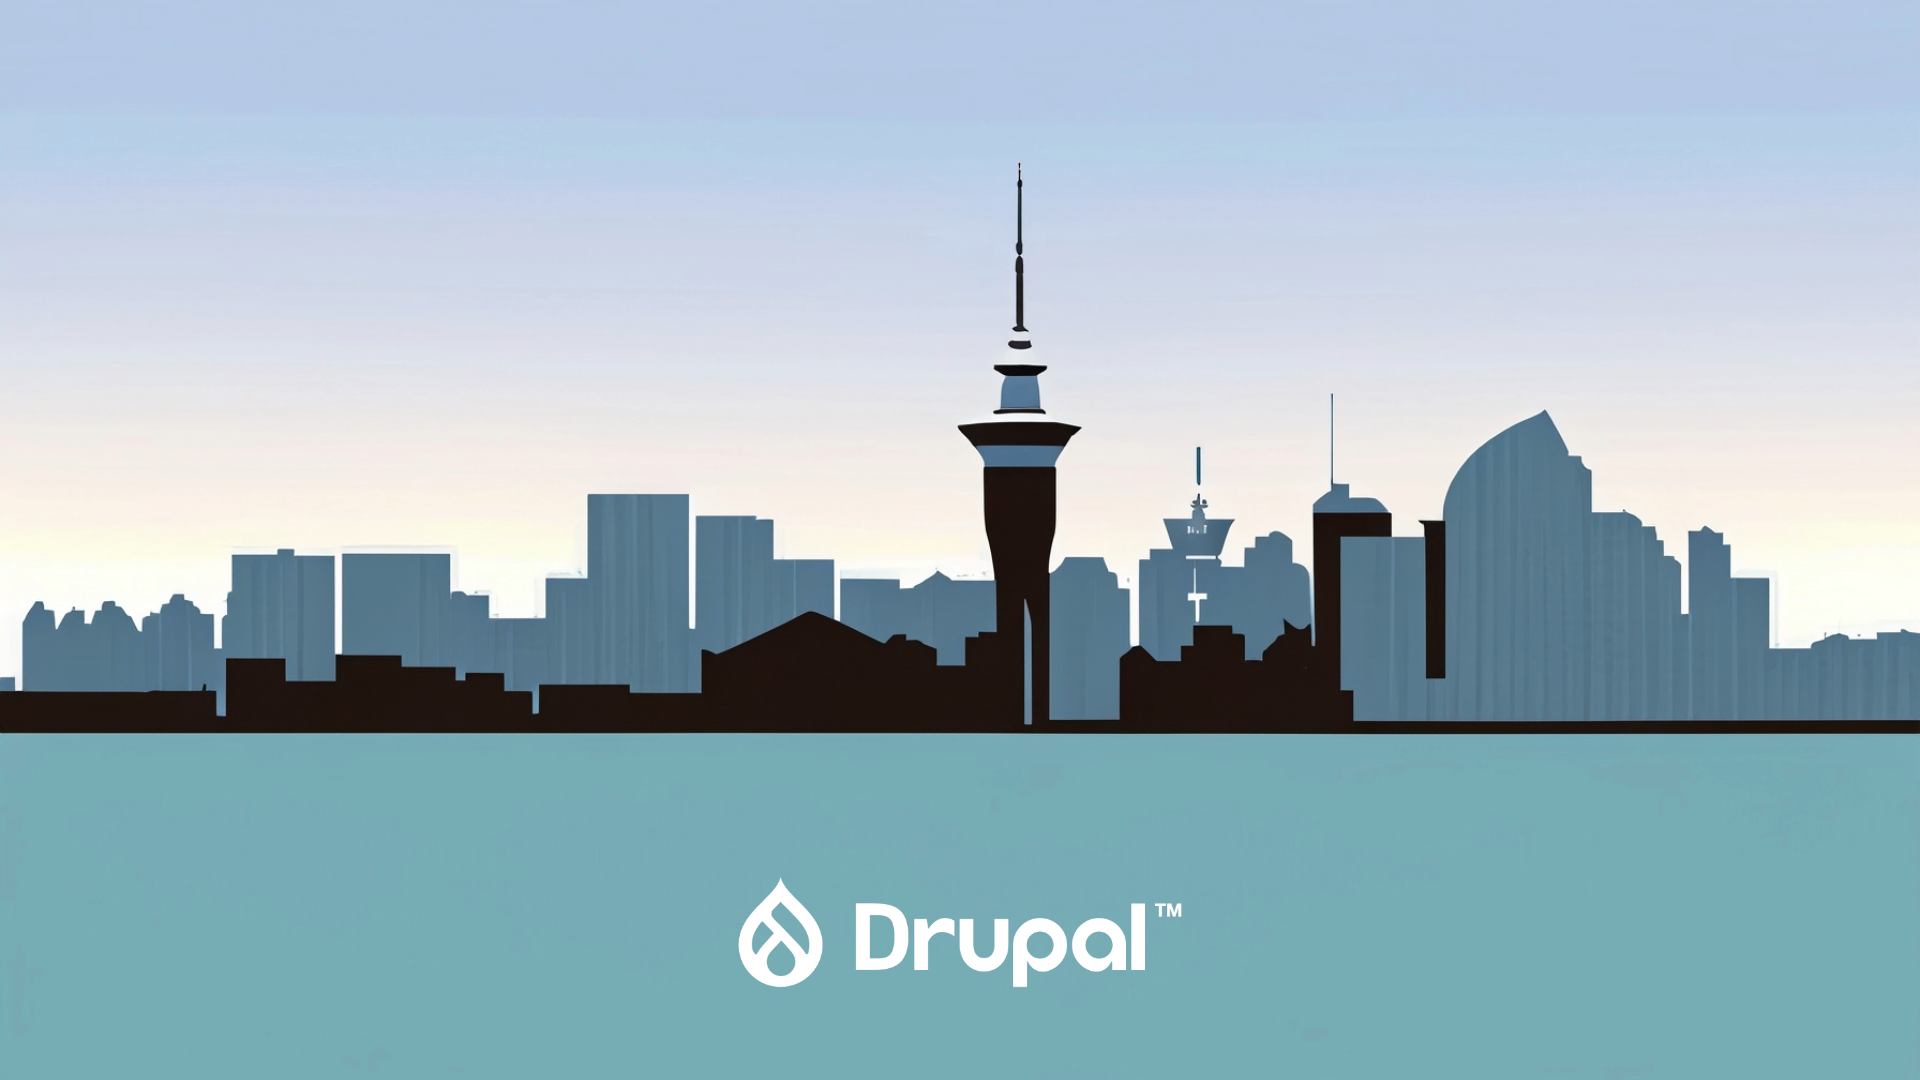 Drupal logo, in the background is New Zealand